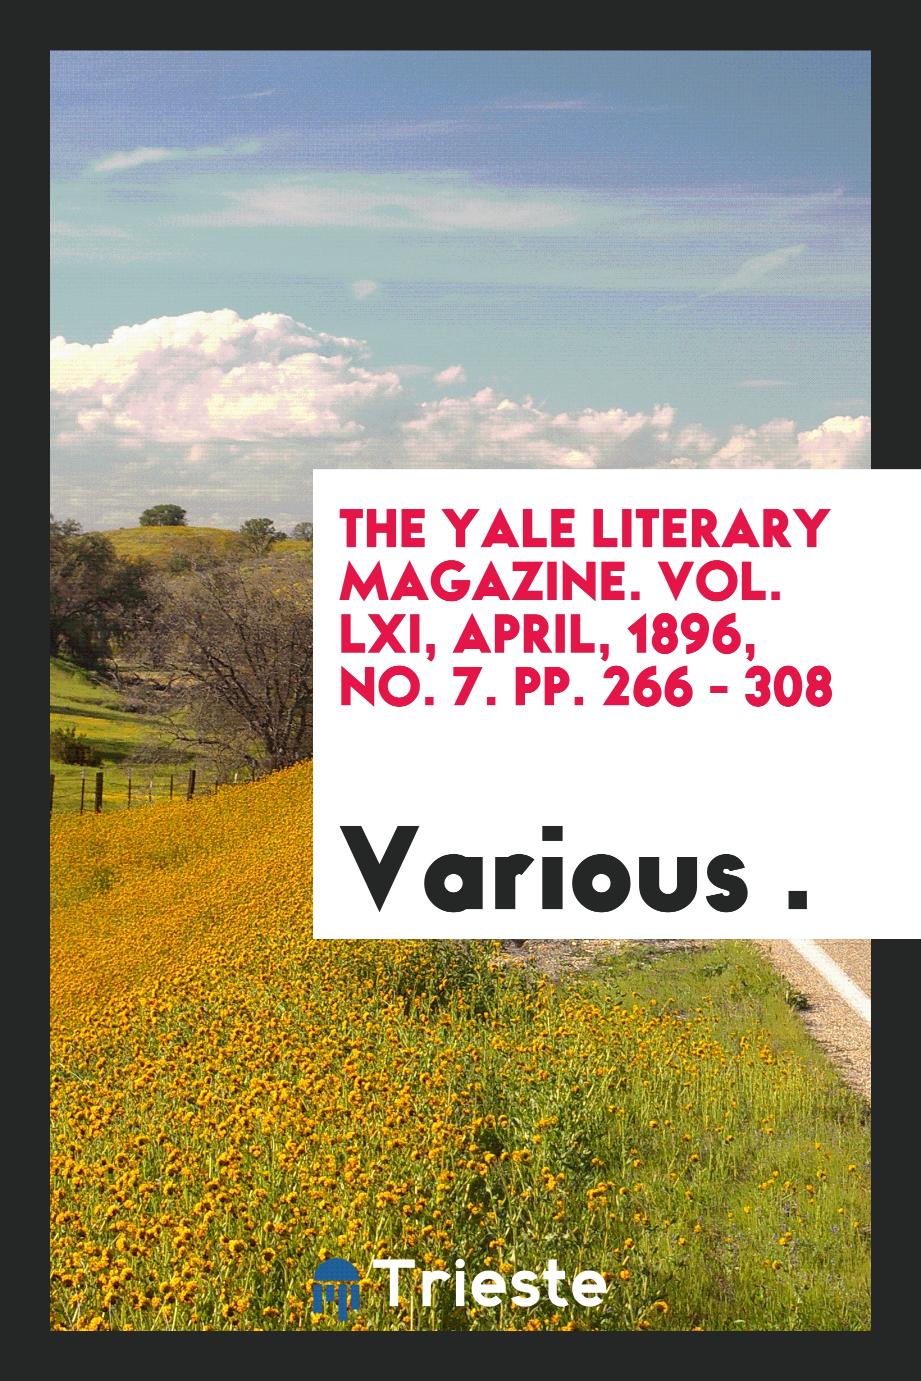 The Yale literary magazine. Vol. LXI, April, 1896, No. 7. pp. 266 - 308